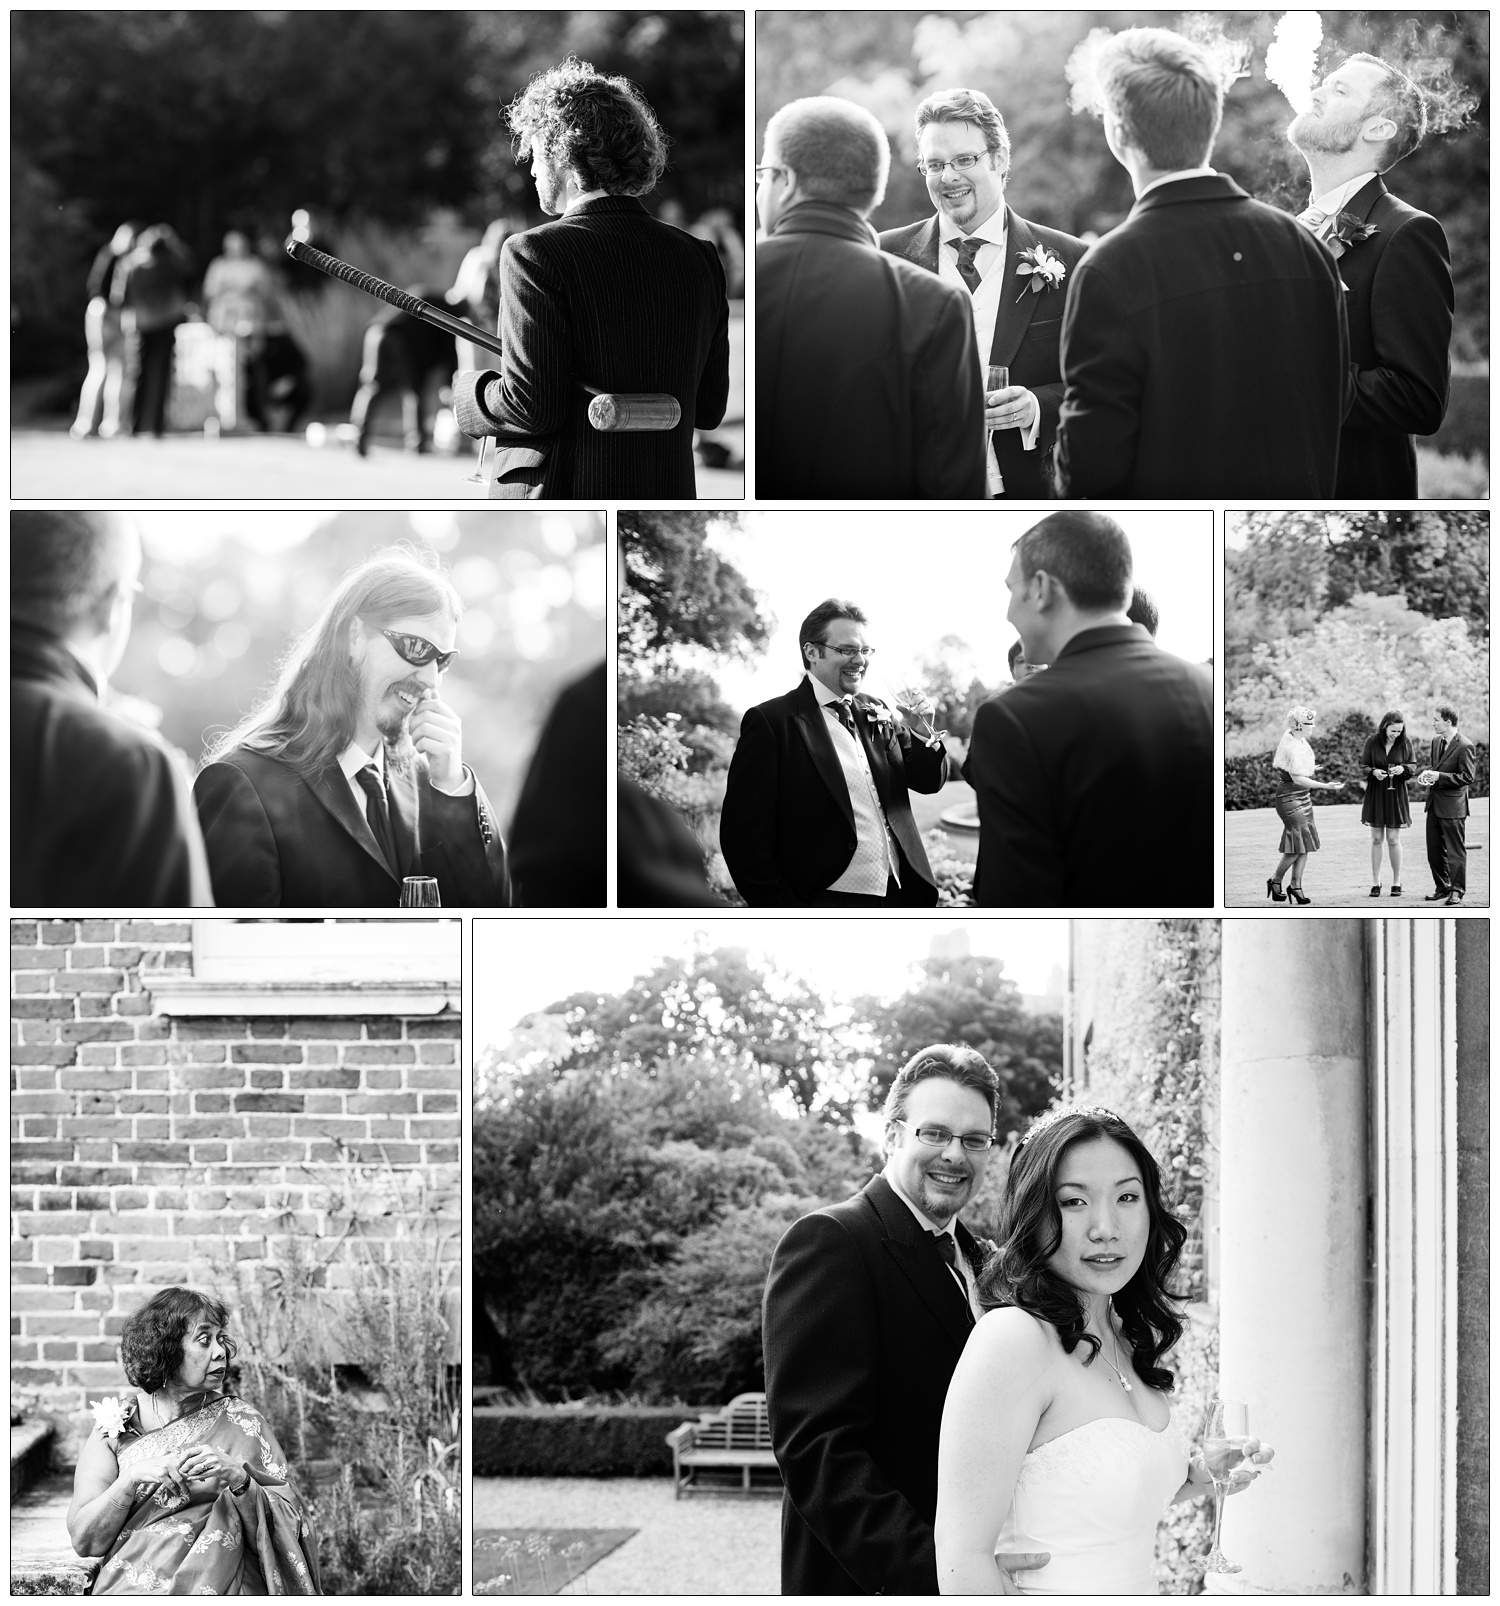 Pictures of wedding guests enjoying the grounds of Hedingham Castle.